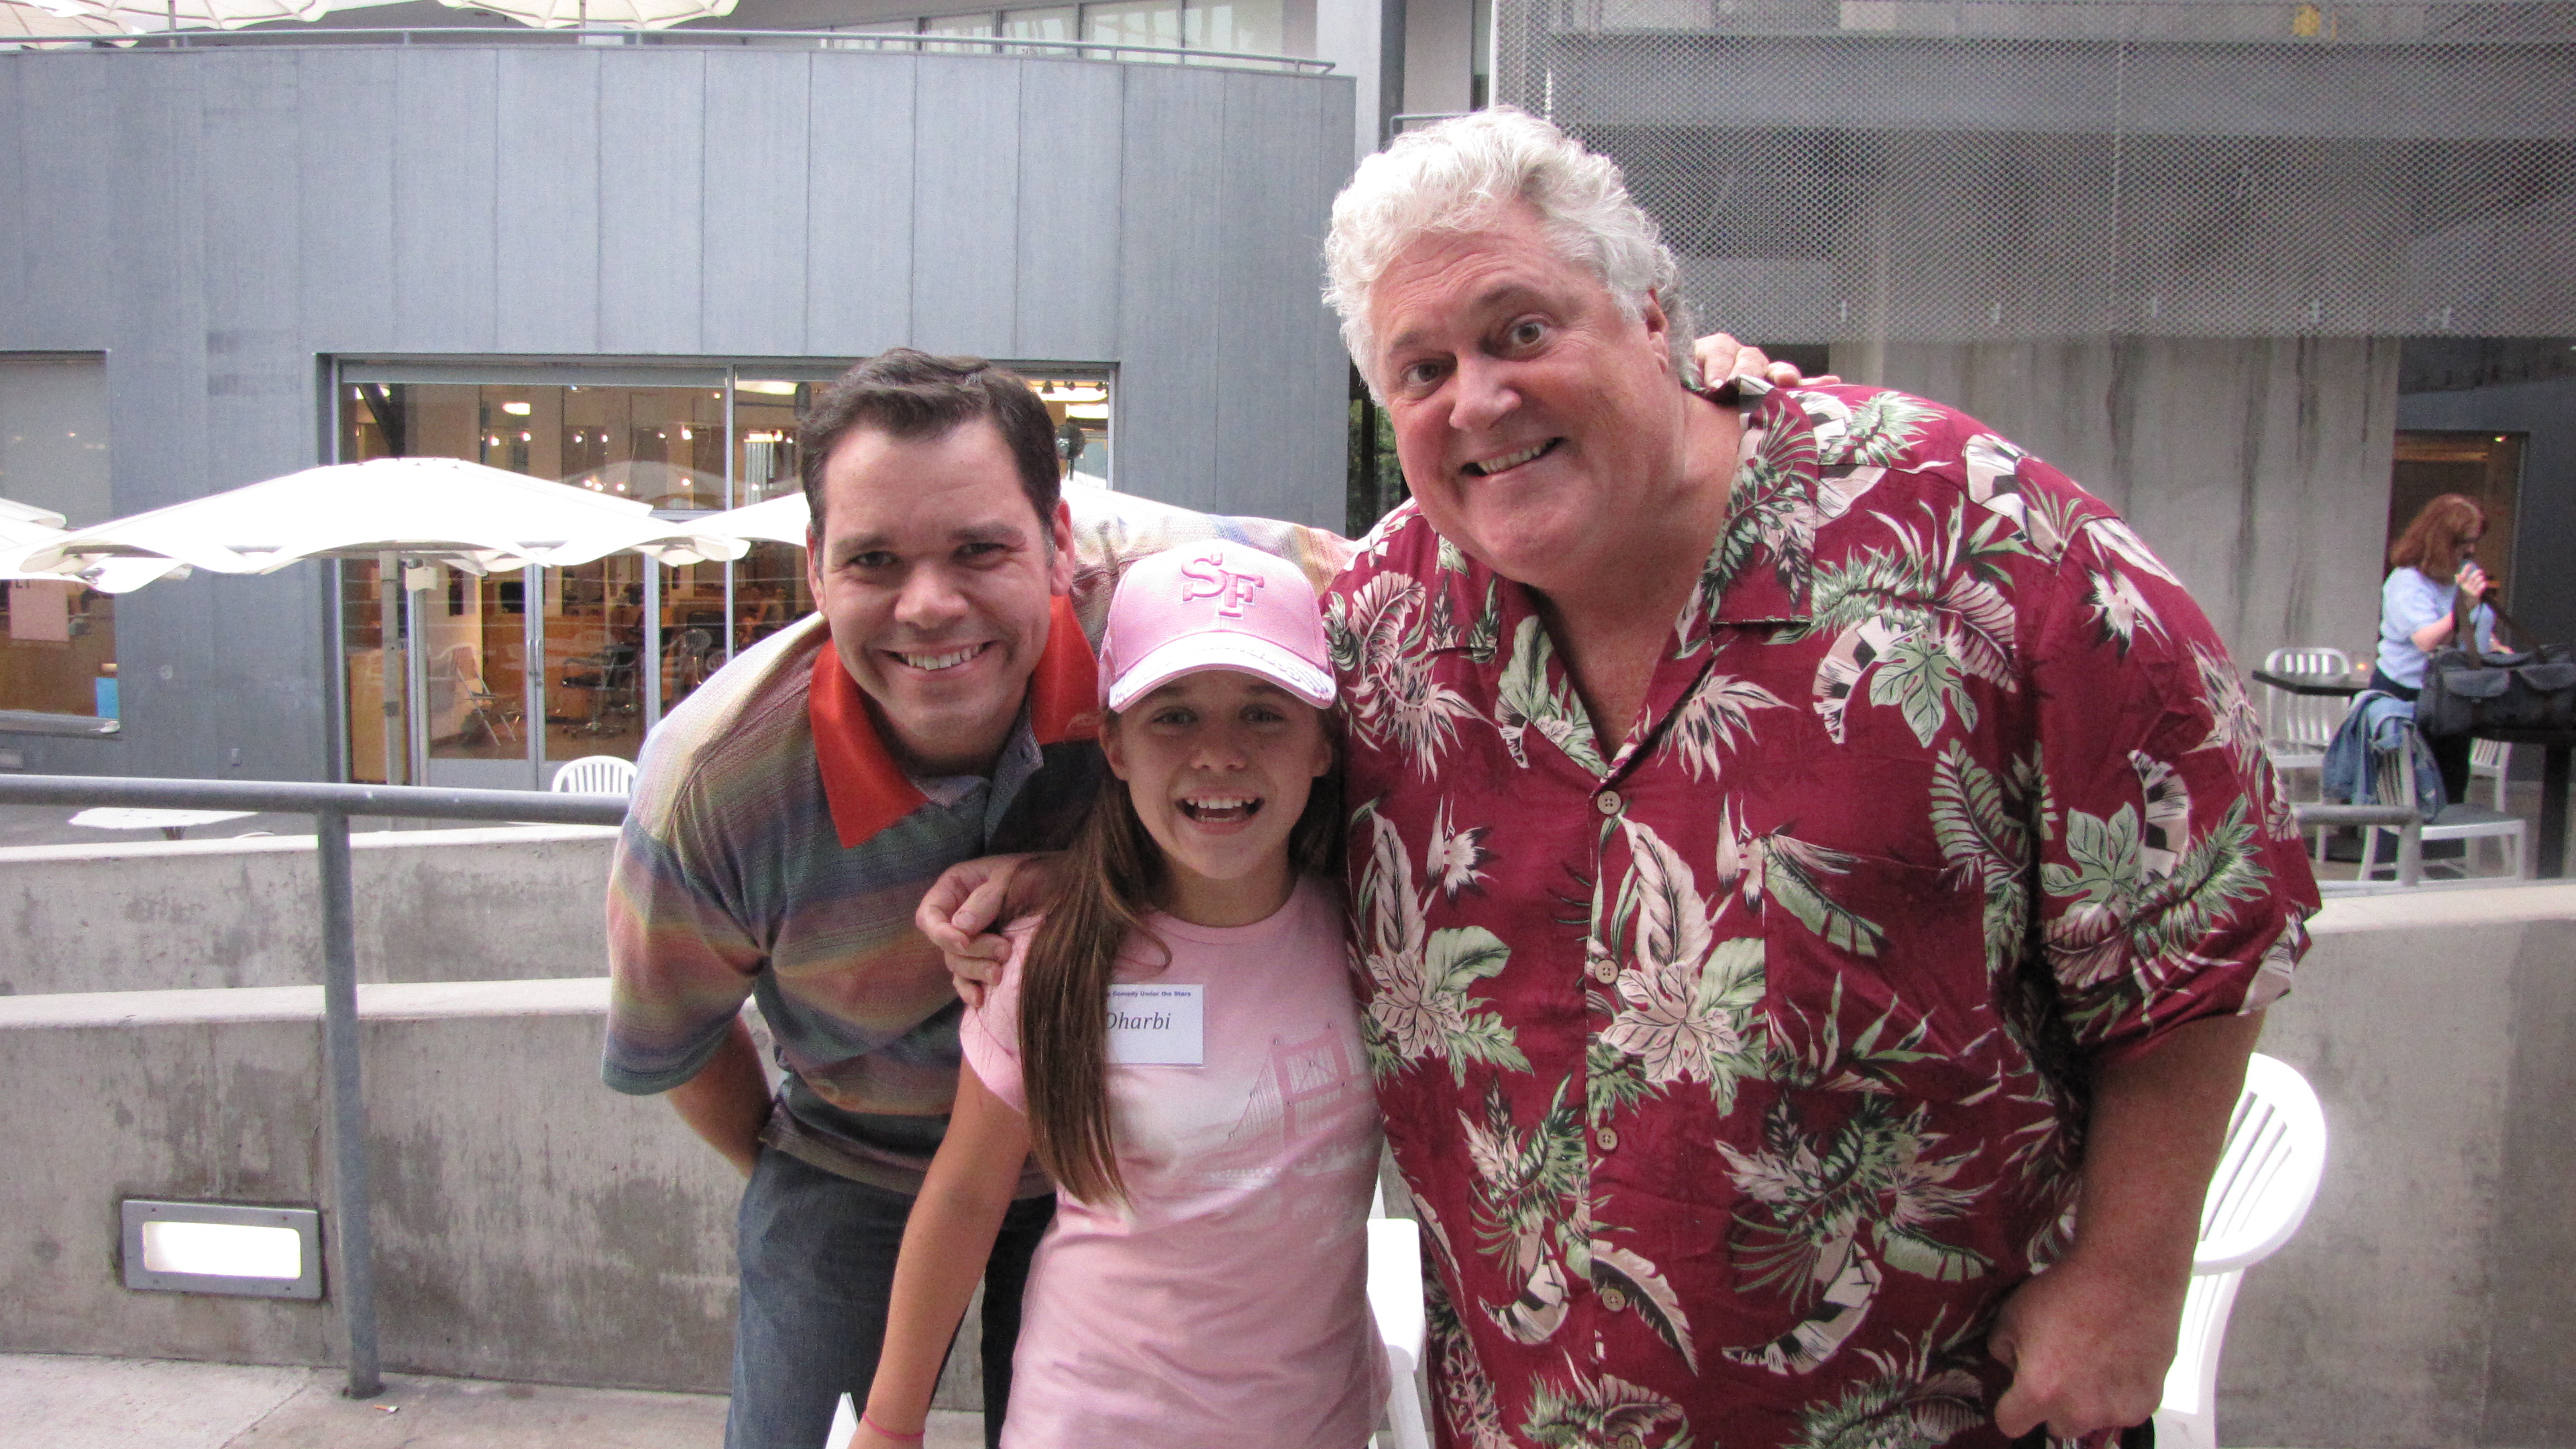 The amazing Voice Over Talents, Pat Duke (Swamp People/Secret Mt. Fort Awesome) and Mick Wingert (Po in Kung Fu Panda)